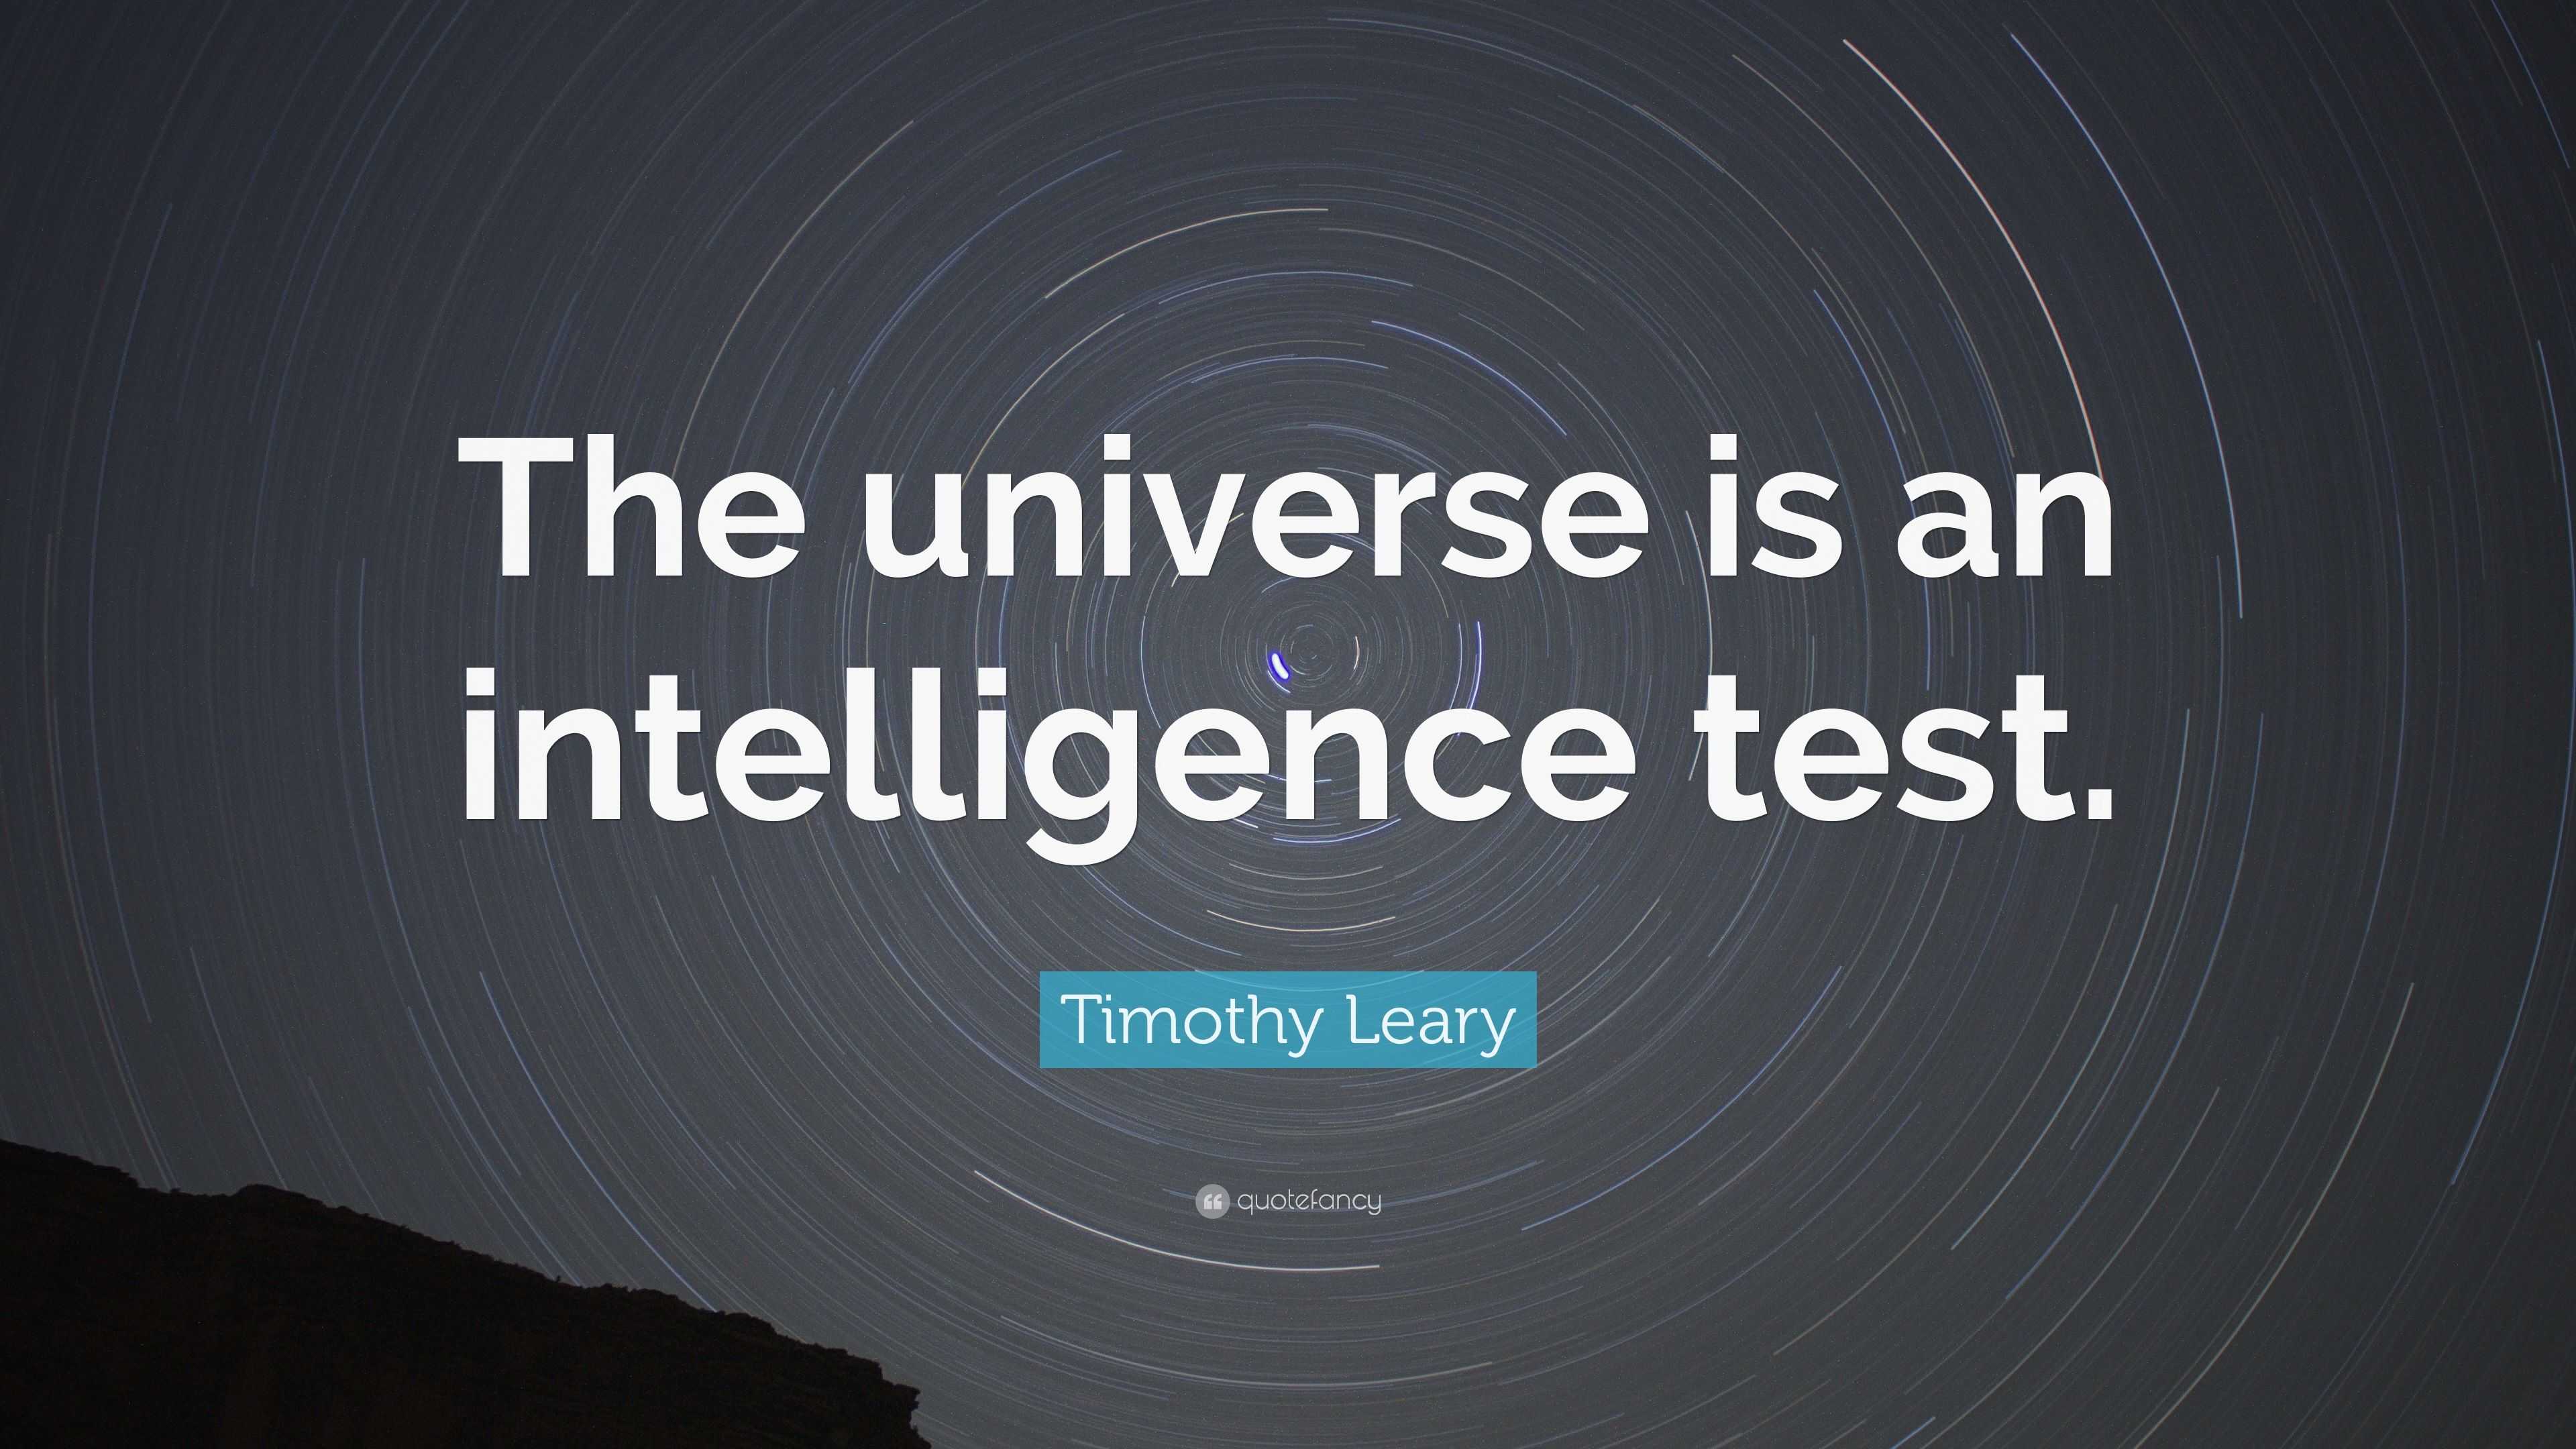 timothy-leary-quote-the-universe-is-an-intelligence-test